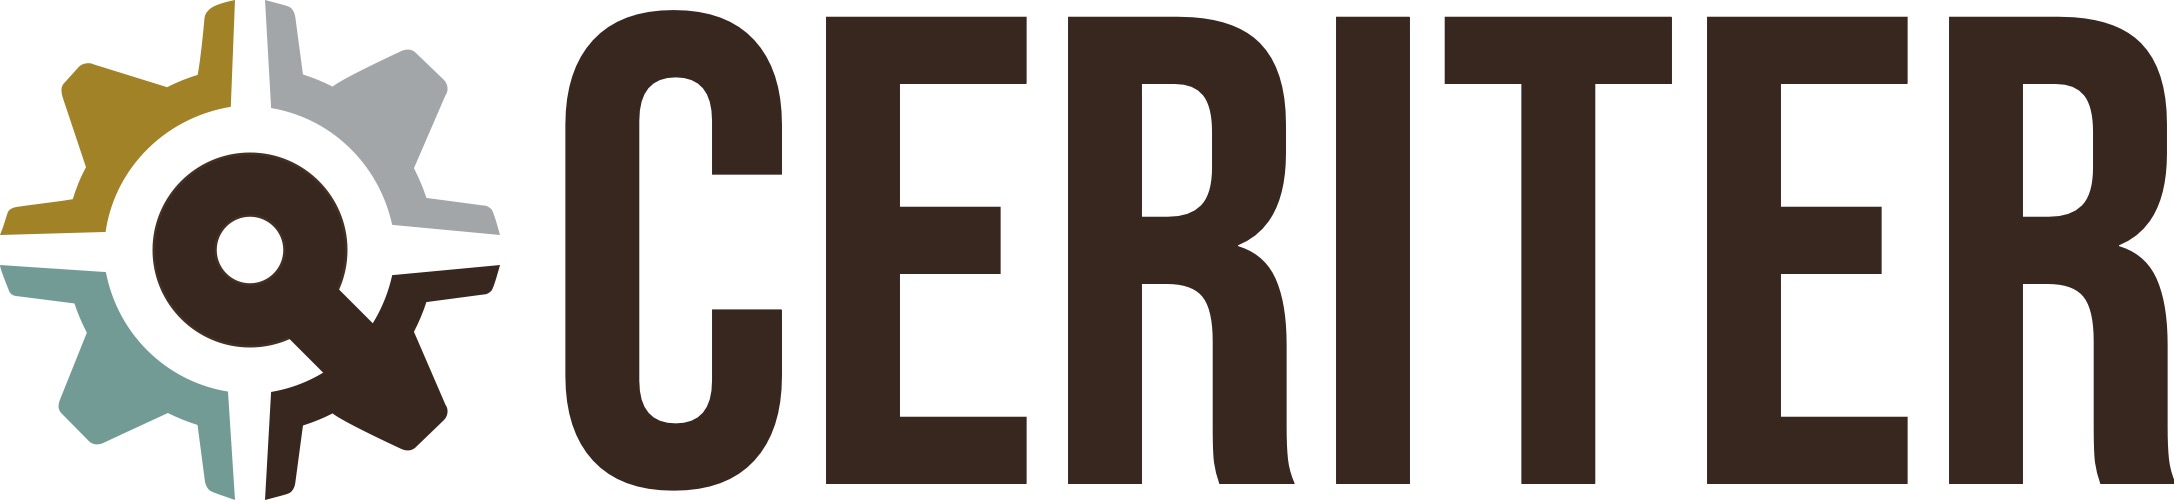 Ceriter logo with text - white background-1